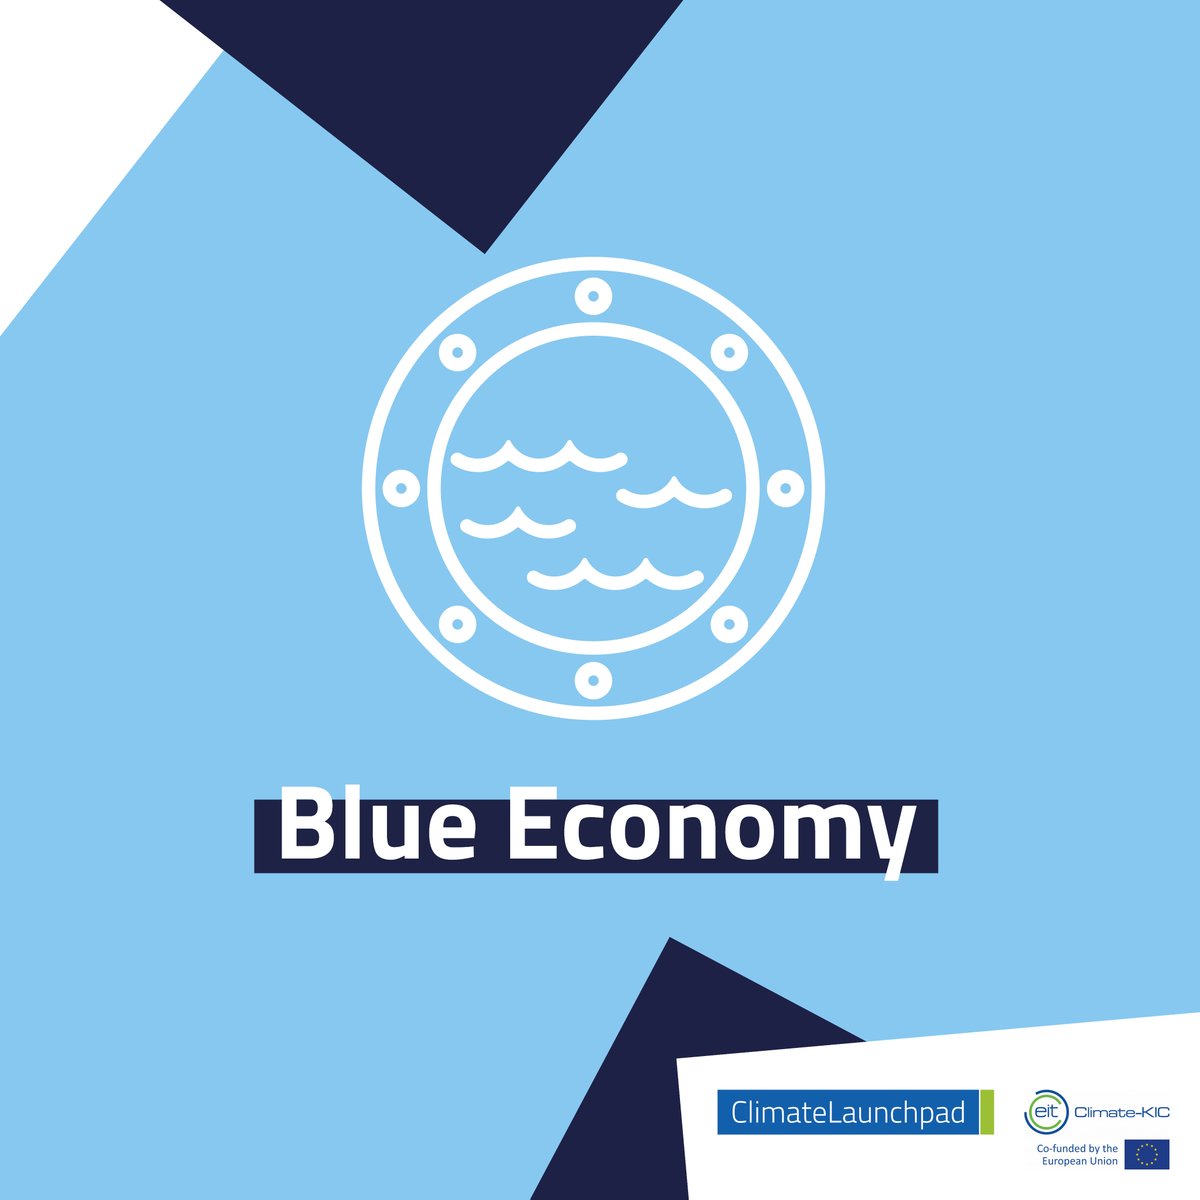 Do you have a #business idea that fits in our theme Blue Economy and benefits the economy and society without compromising the environmental sustainability of oceans and coastal areas? 🐟🐬 Apply now: climatelaunchpad.org/application-fo… #entrepreneurship #competition #CLP22 @ClimateKIC